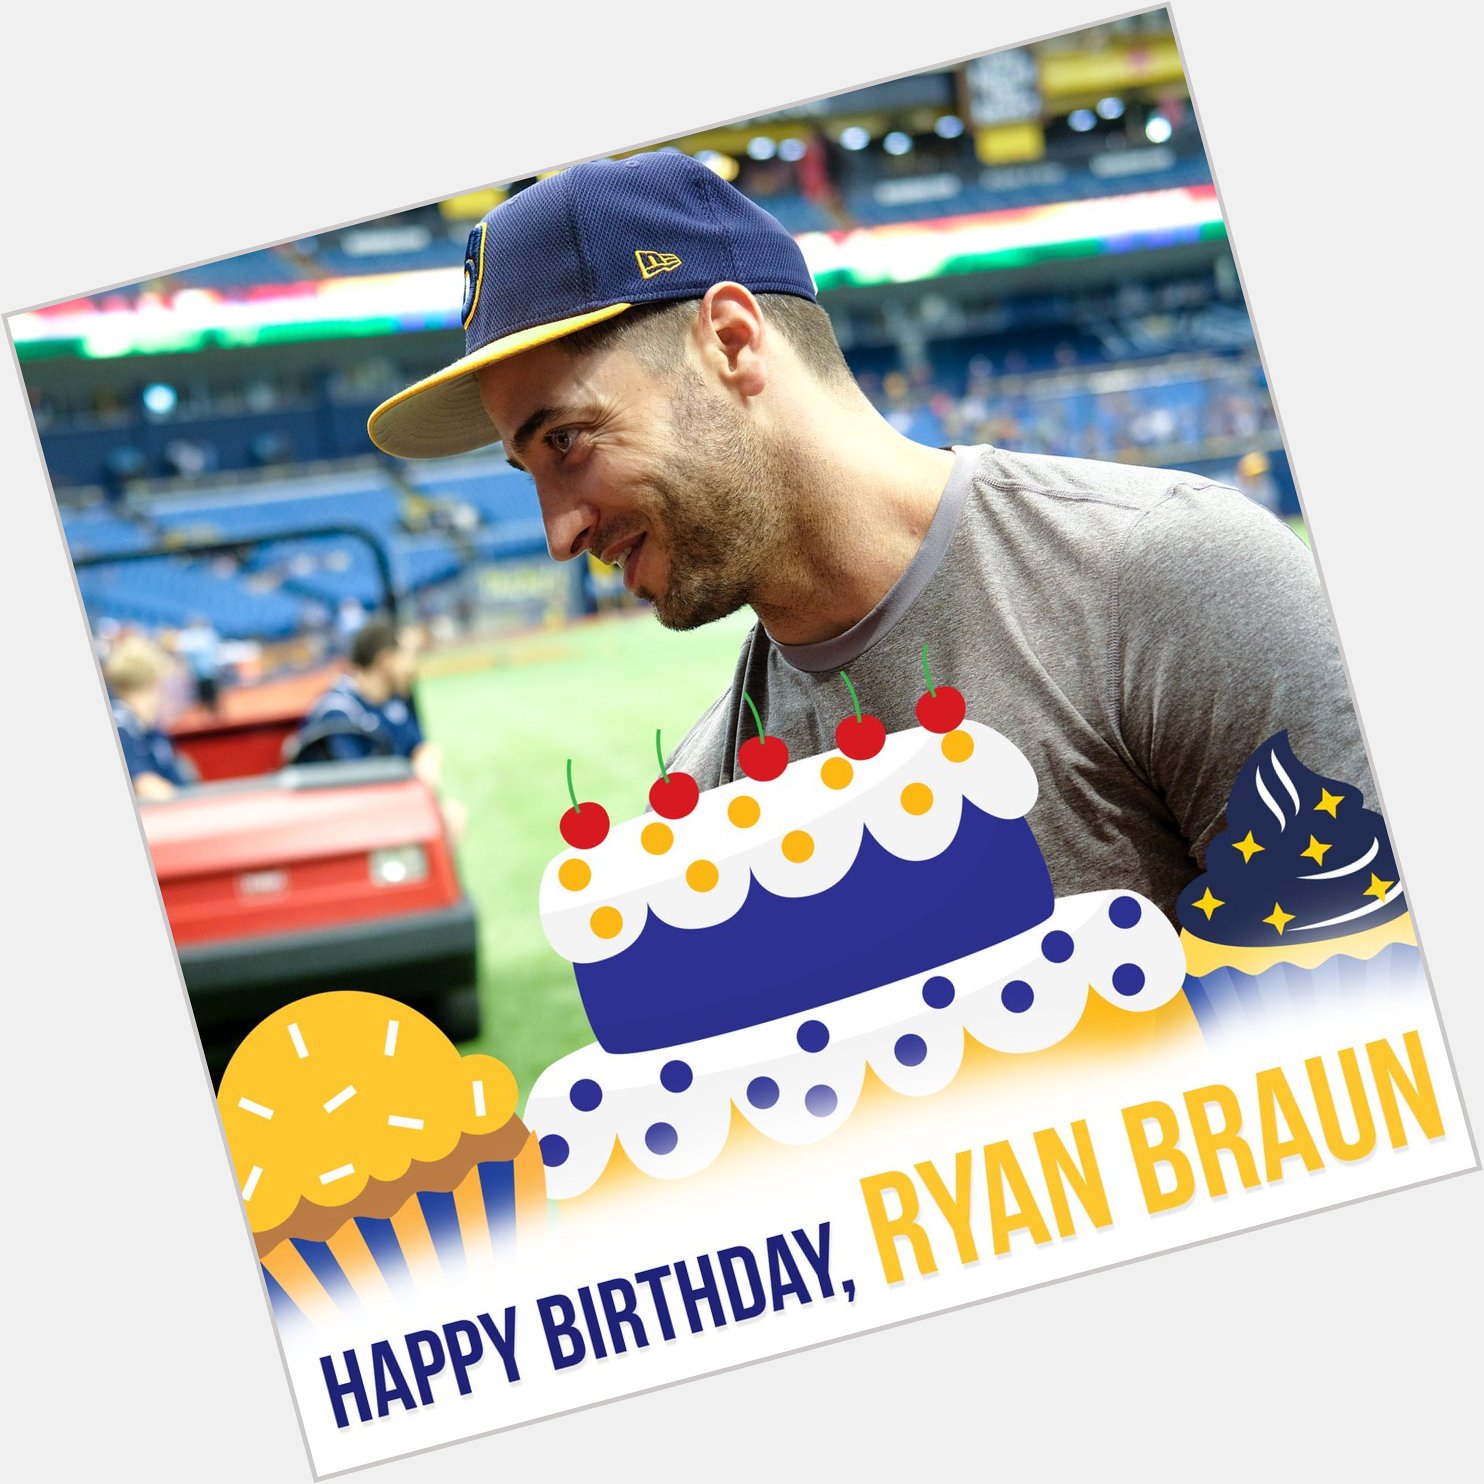 Would like to wish own Ryan Braun a Happy Birthday! Have a day!  